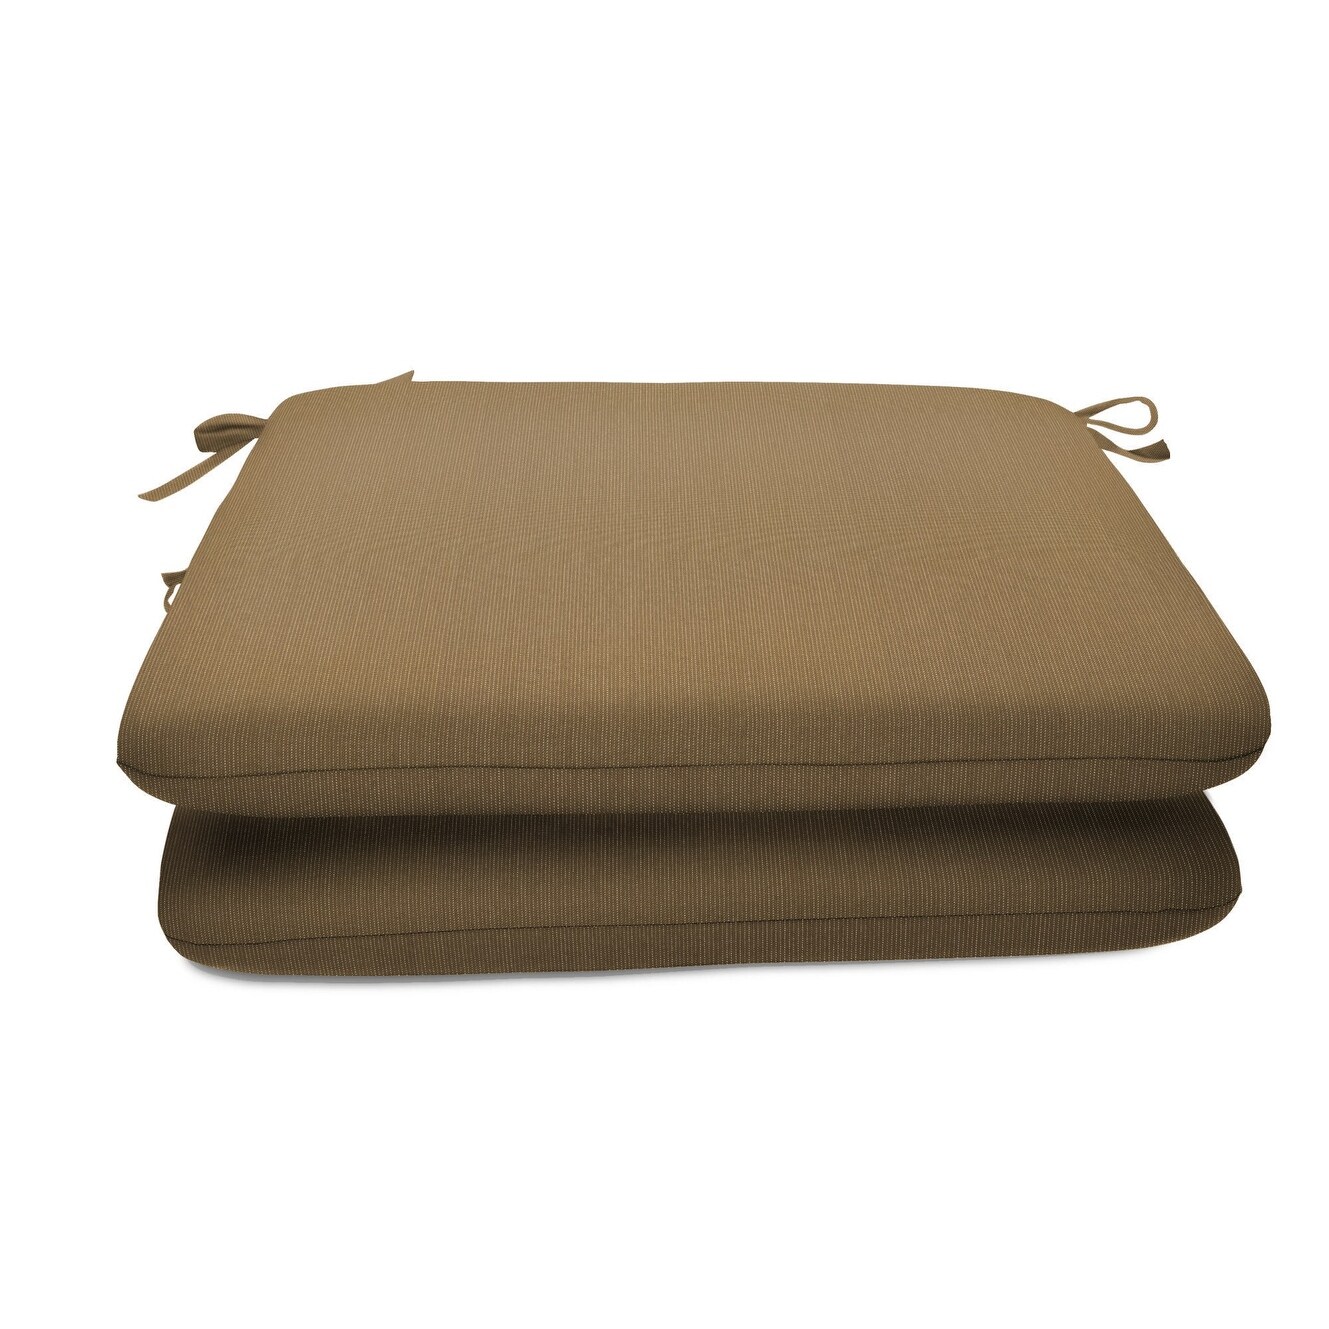 https://ak1.ostkcdn.com/images/products/is/images/direct/1840027e9ba29a5e4a2c17040fefece7bbbc266a/20-X-20-Sunbrella-Seat-Pad-2-Pack.jpg